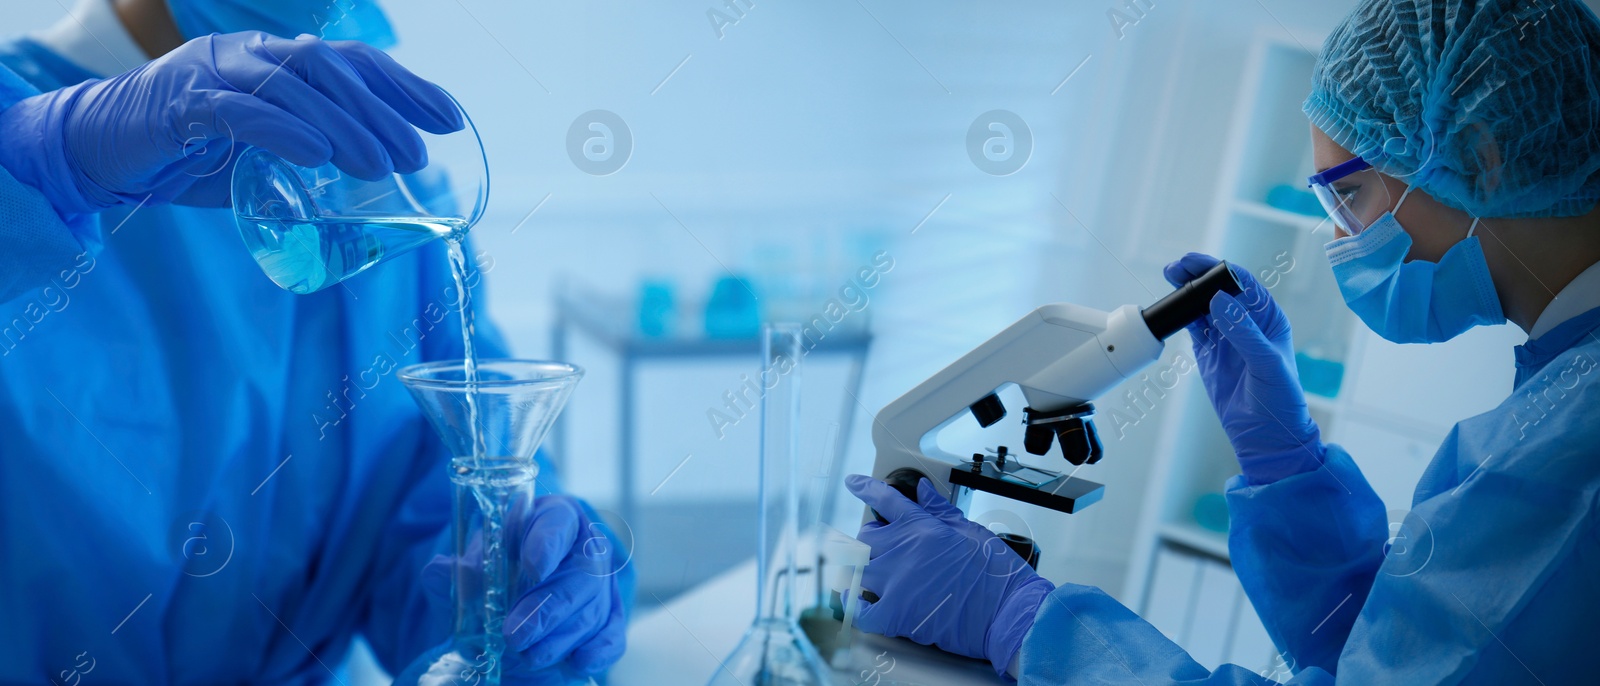 Image of Testing, analysis and experiment. Laboratory employees working, banner design